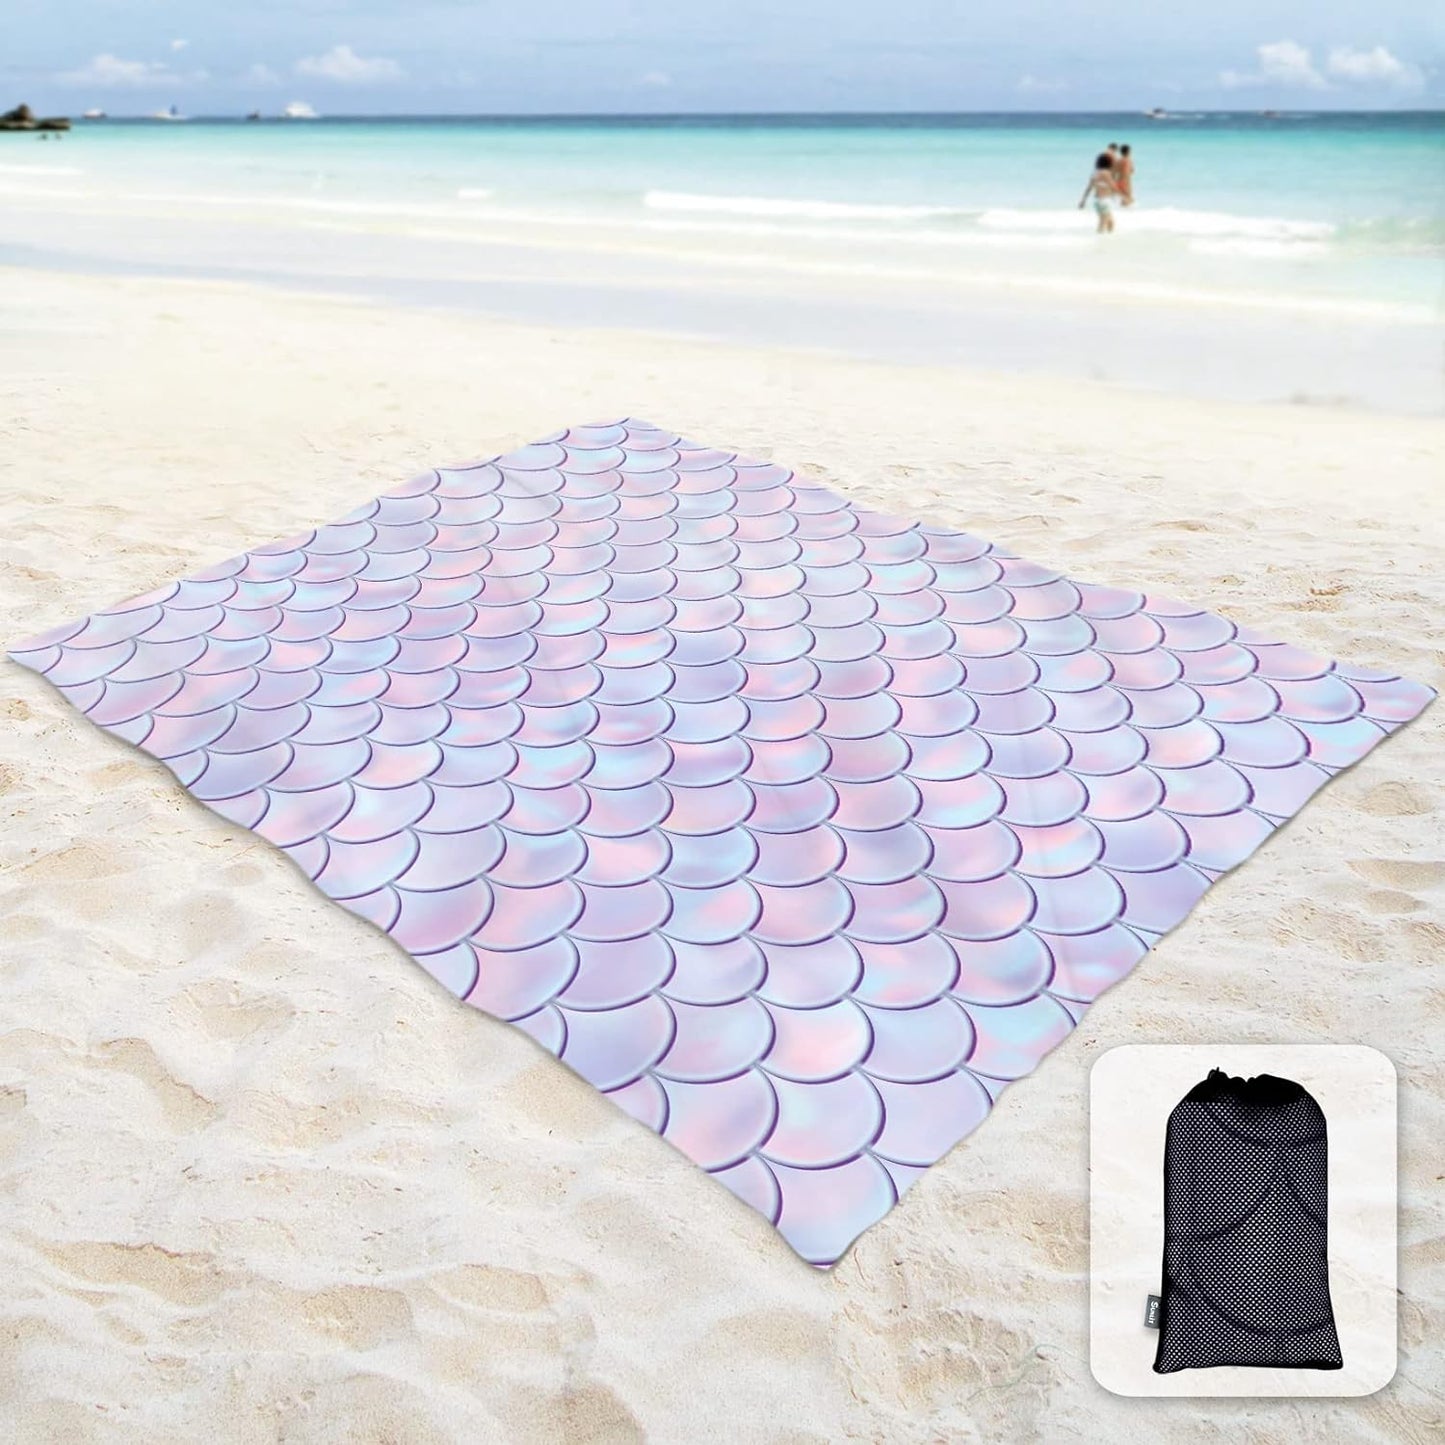 Sunlit Silky Soft Sand Proof Beach Blanket 106"x81" / 85"x72" Sand Proof Mat with Corner Pockets and Mesh Bag for Beach Party, Travel, Camping and Outdoor Music Festival,Purple Mermaid Scale